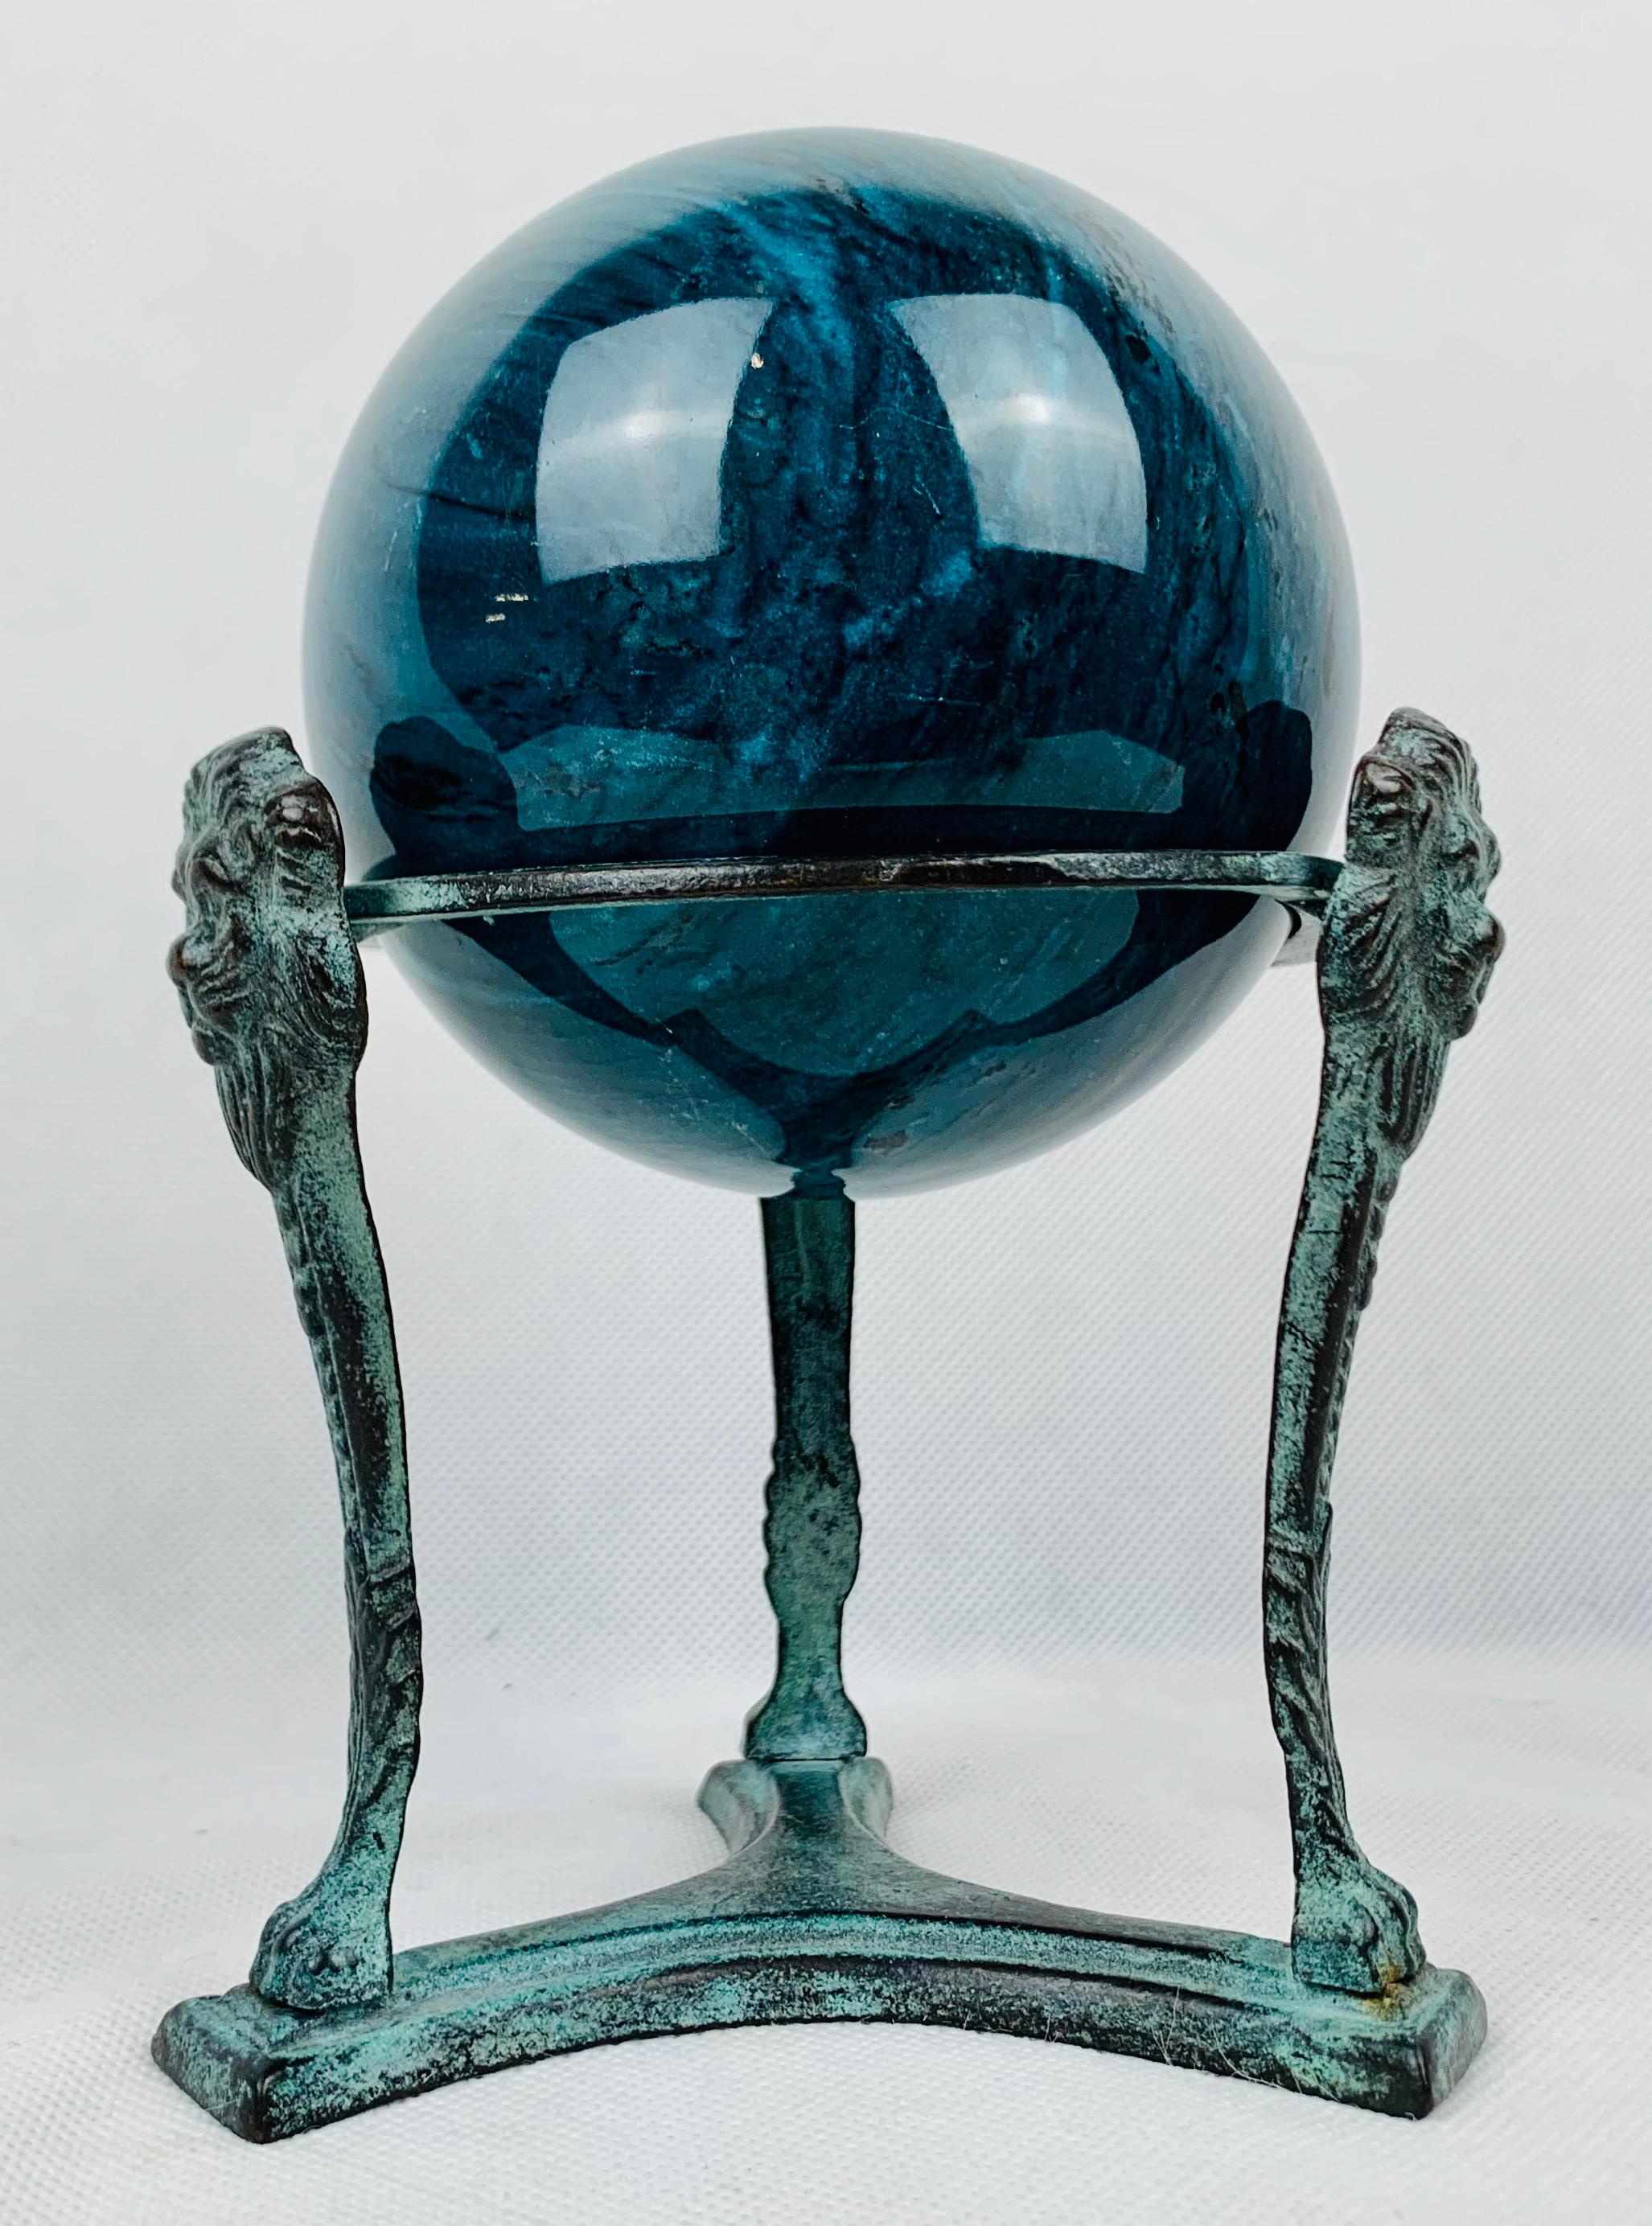 A handsome blue marble orb or sphere resting on a neo-classical stand. The tripod stand has a patinated finish with lion's faces and paws at the base.
If neo-classical objects appeal to you this piece would look great on any table, desk or shelf.